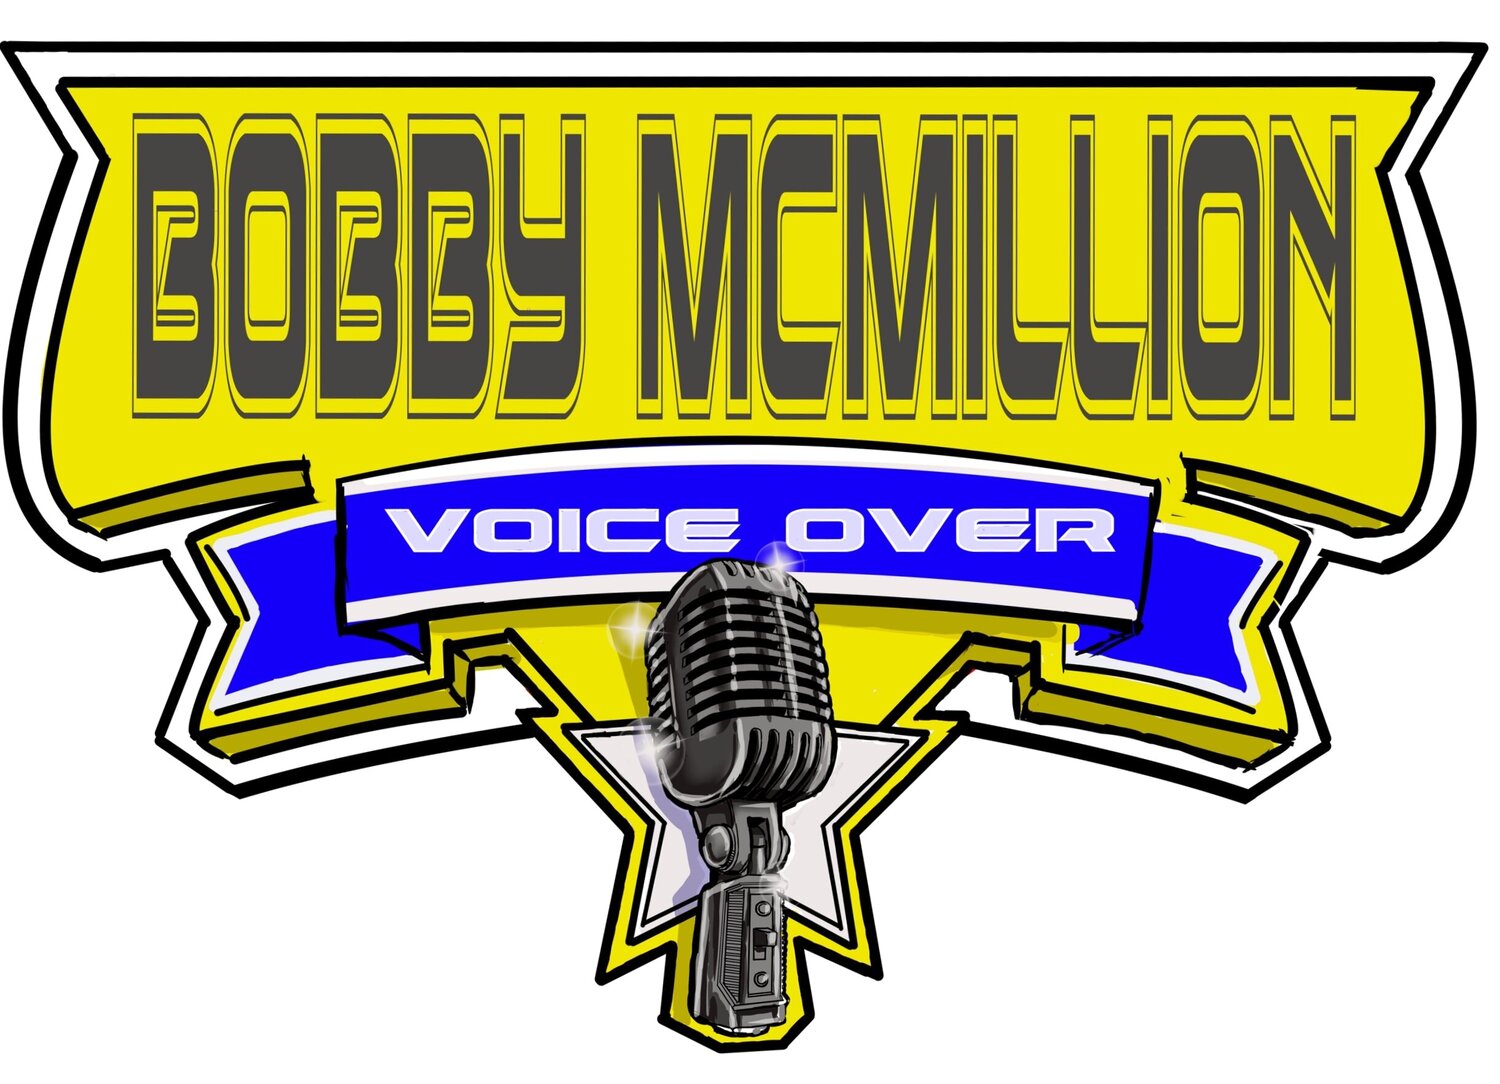 Bobby McMillion Voice Over